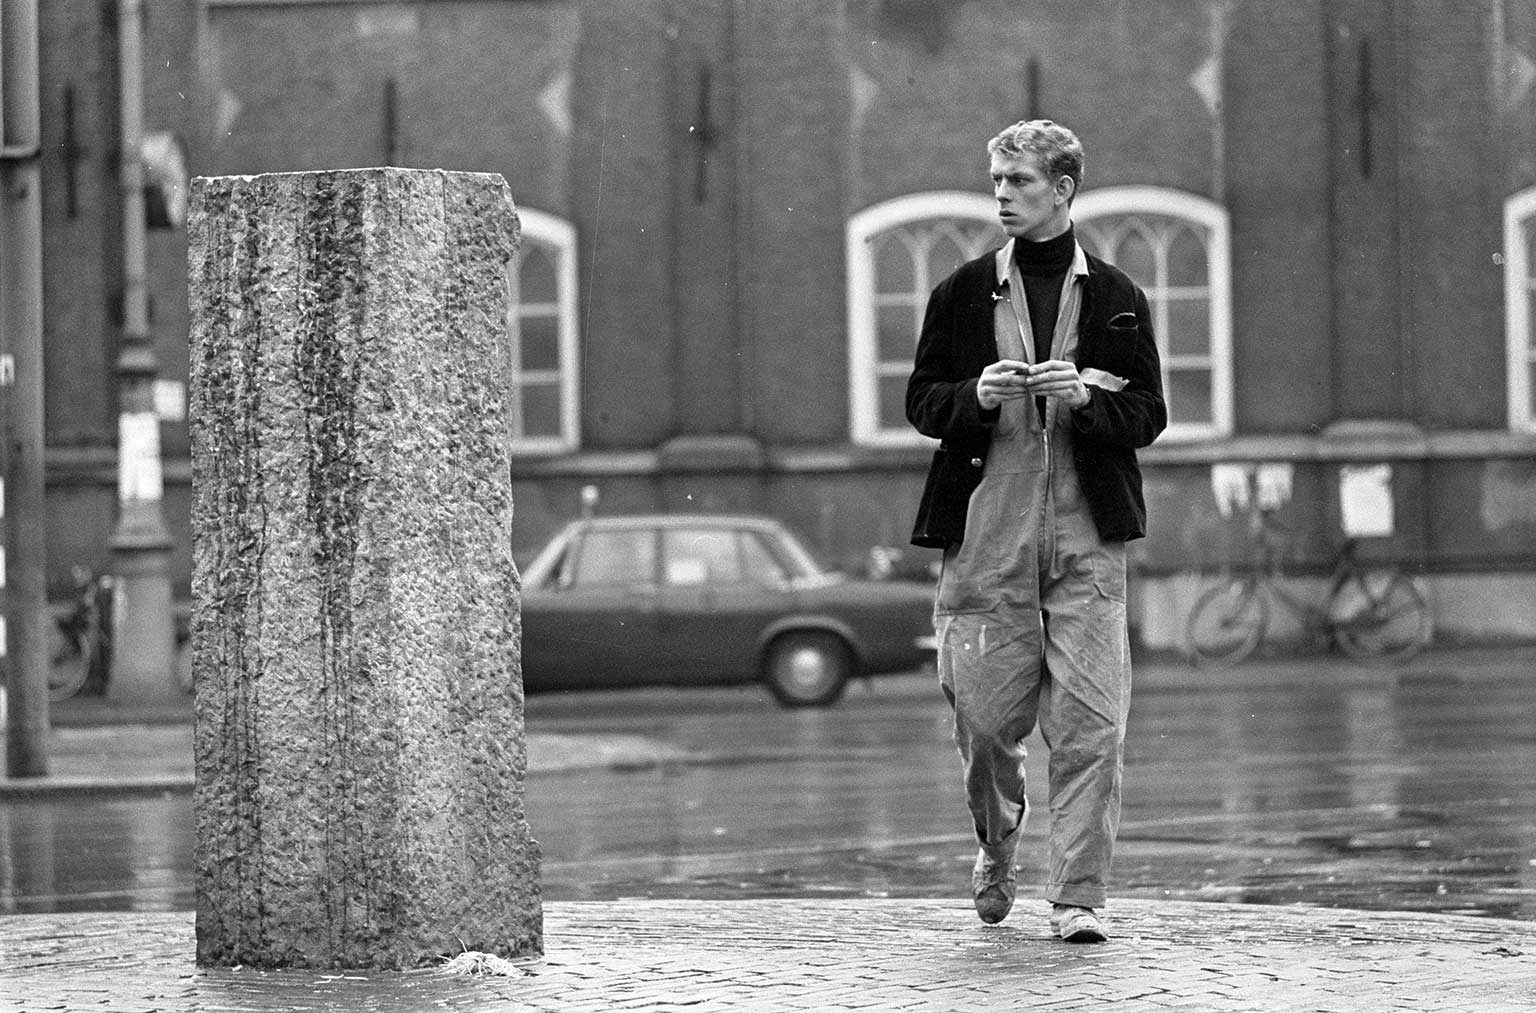 Passer-by looking at the empty pedestal of Het Lieverdje, Amsterdam, in 1966